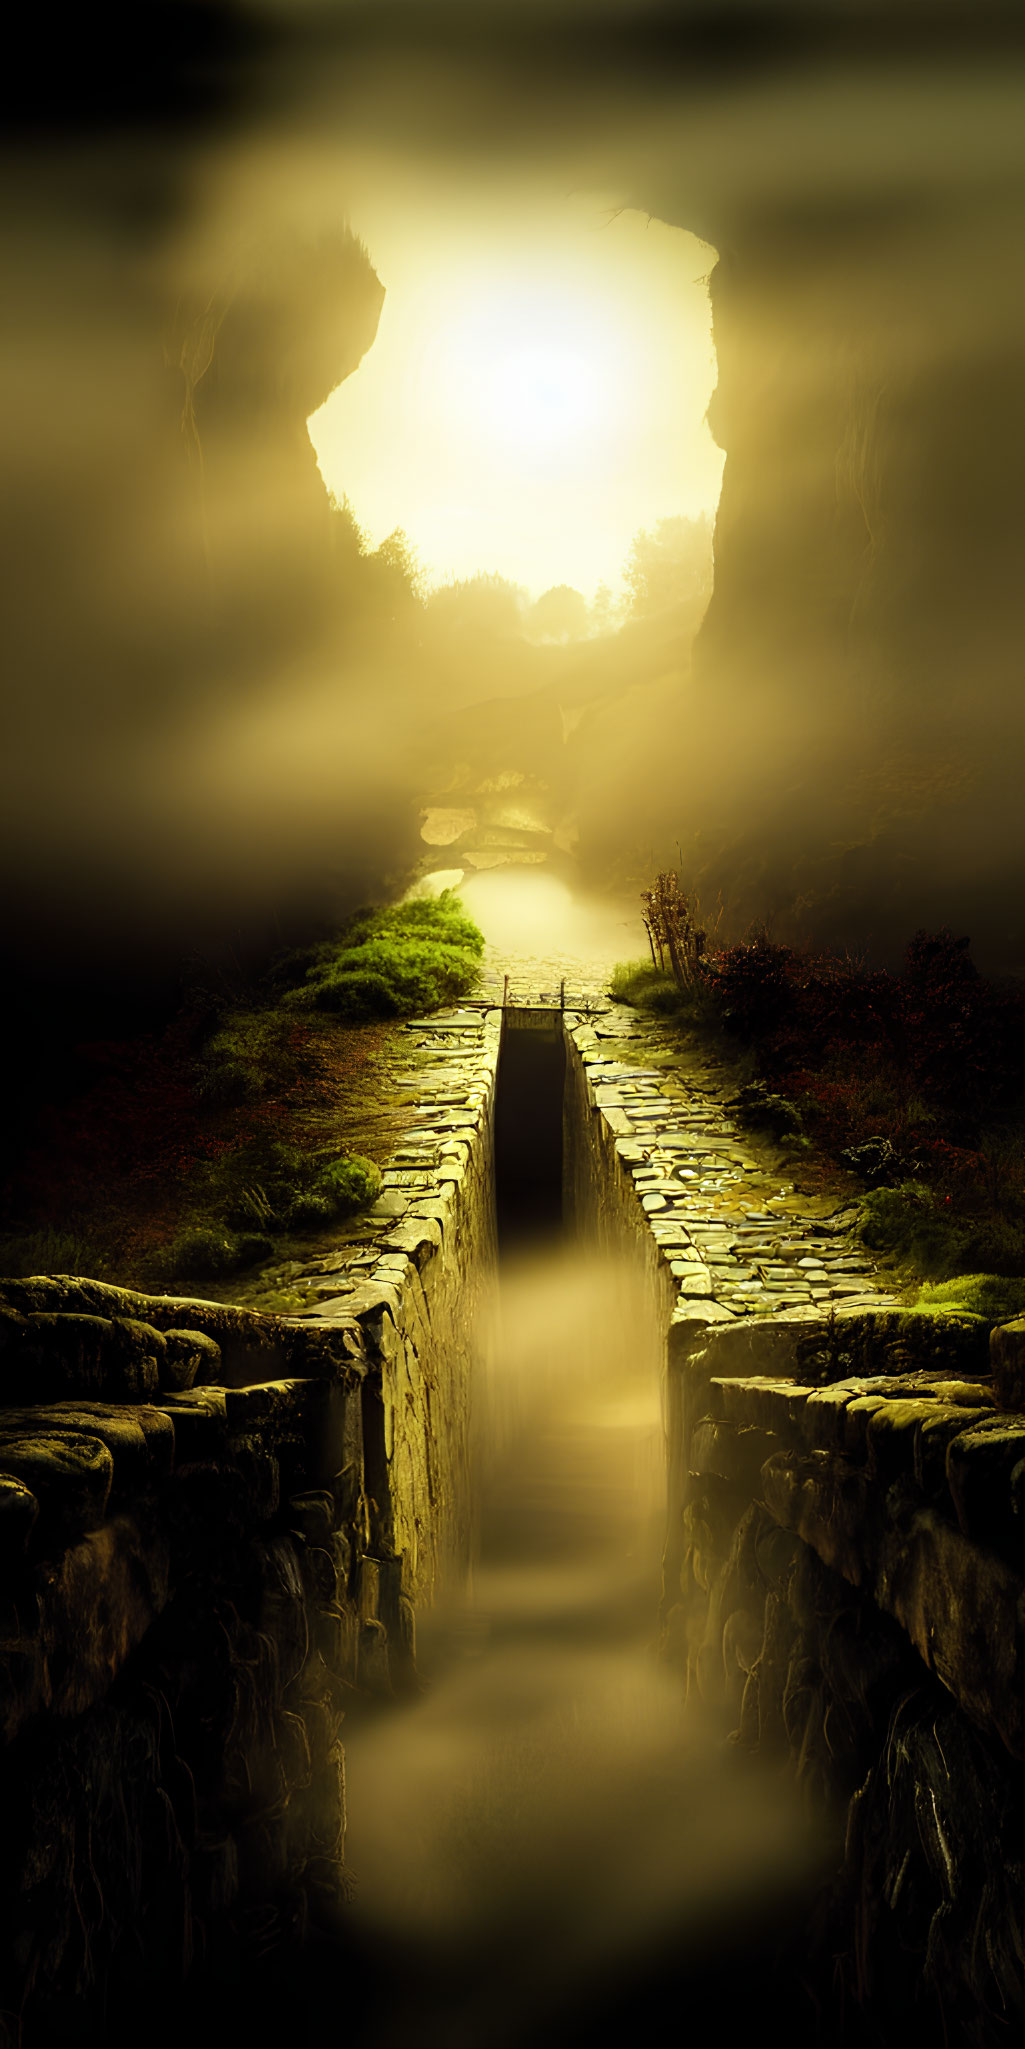 Mystical stone pathway in foggy landscape towards sunlit opening